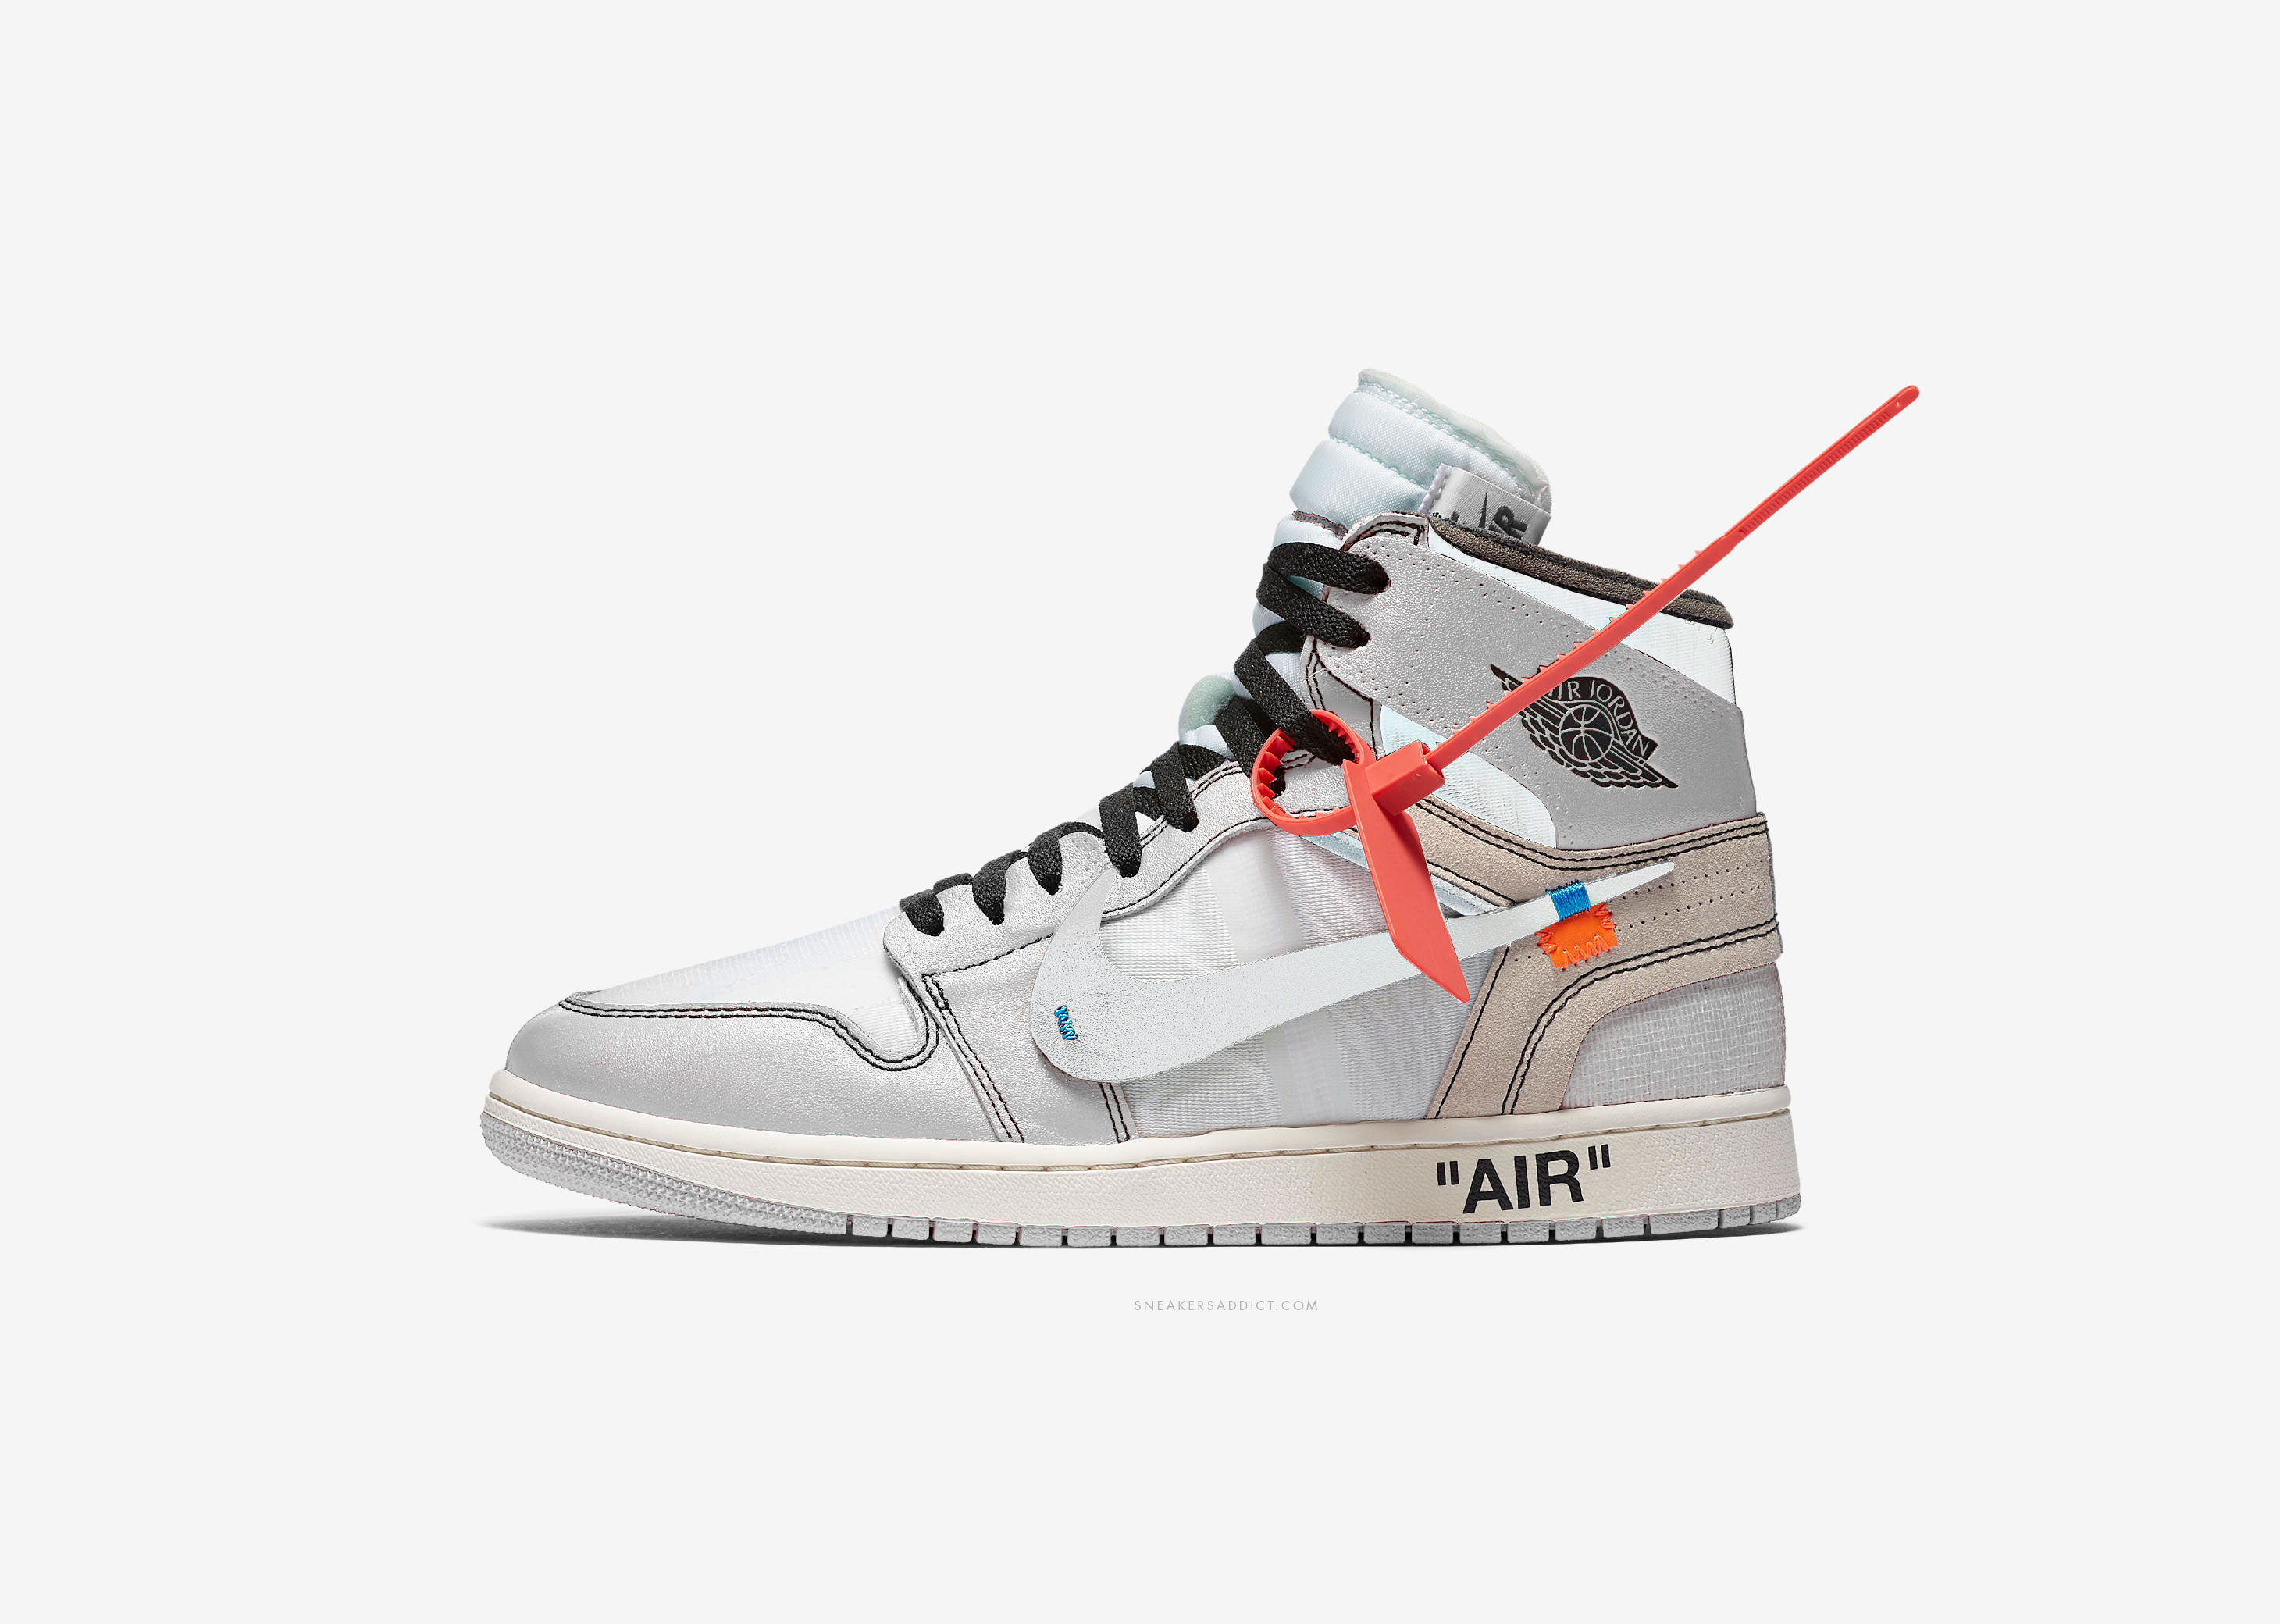 off white sneakers 2018